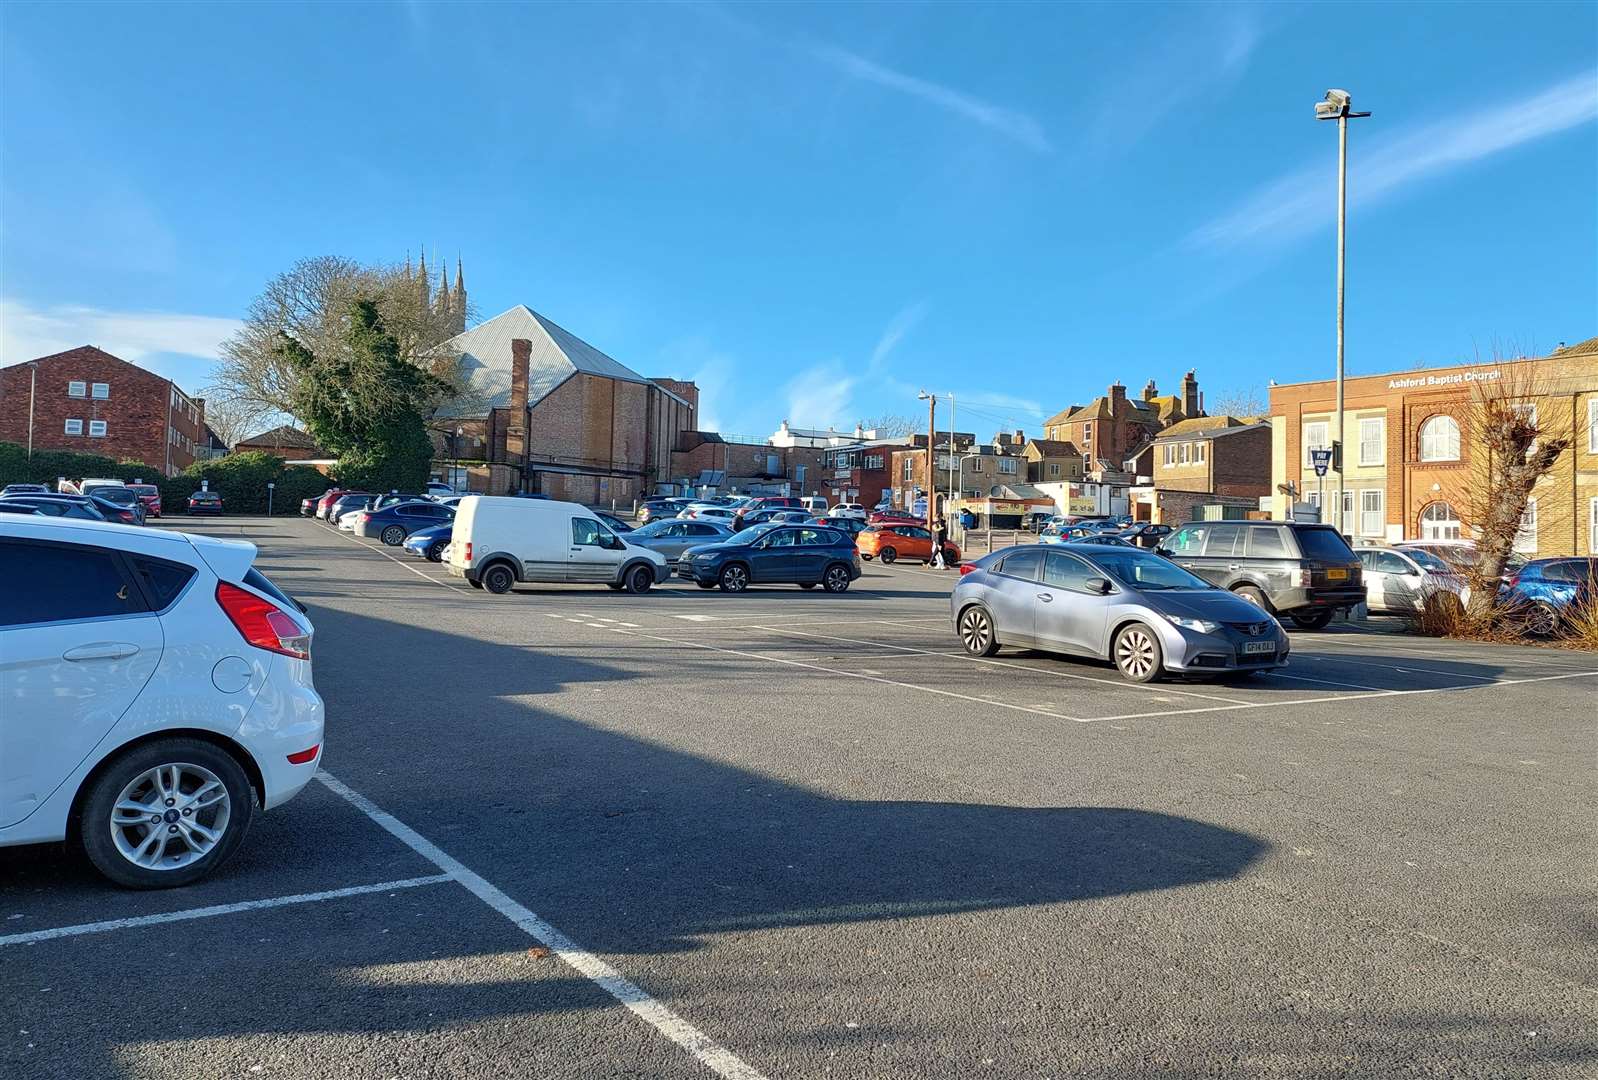 A boy was repeatedly punched in a robbery in Vicarage Lane car park in Ashford